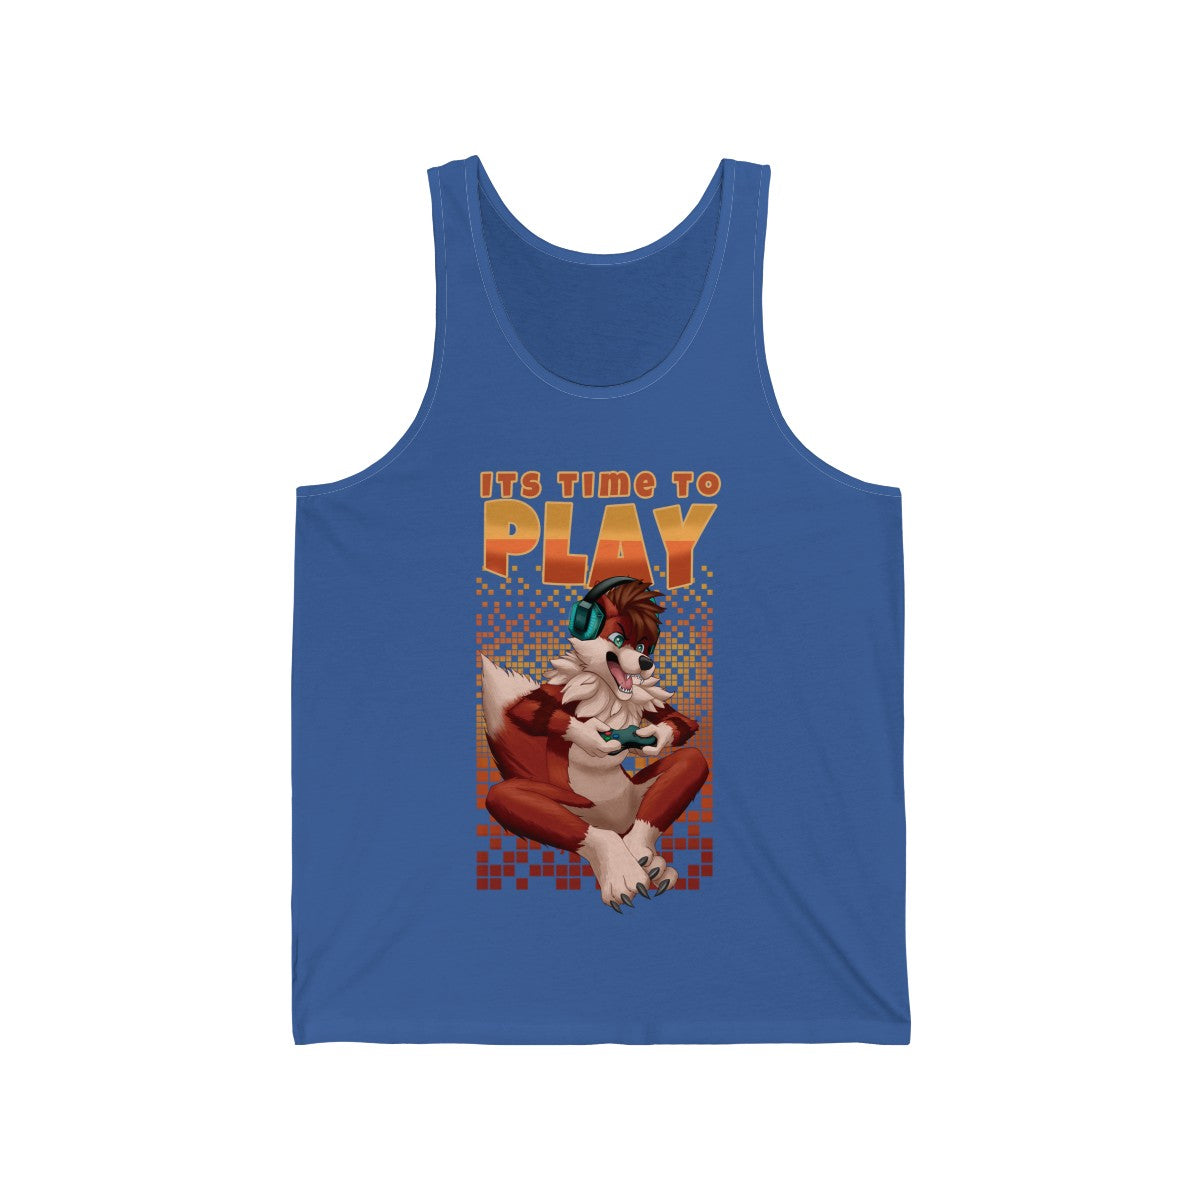 Its Time to Play - Tank Top Tank Top Artworktee Royal Blue XS 